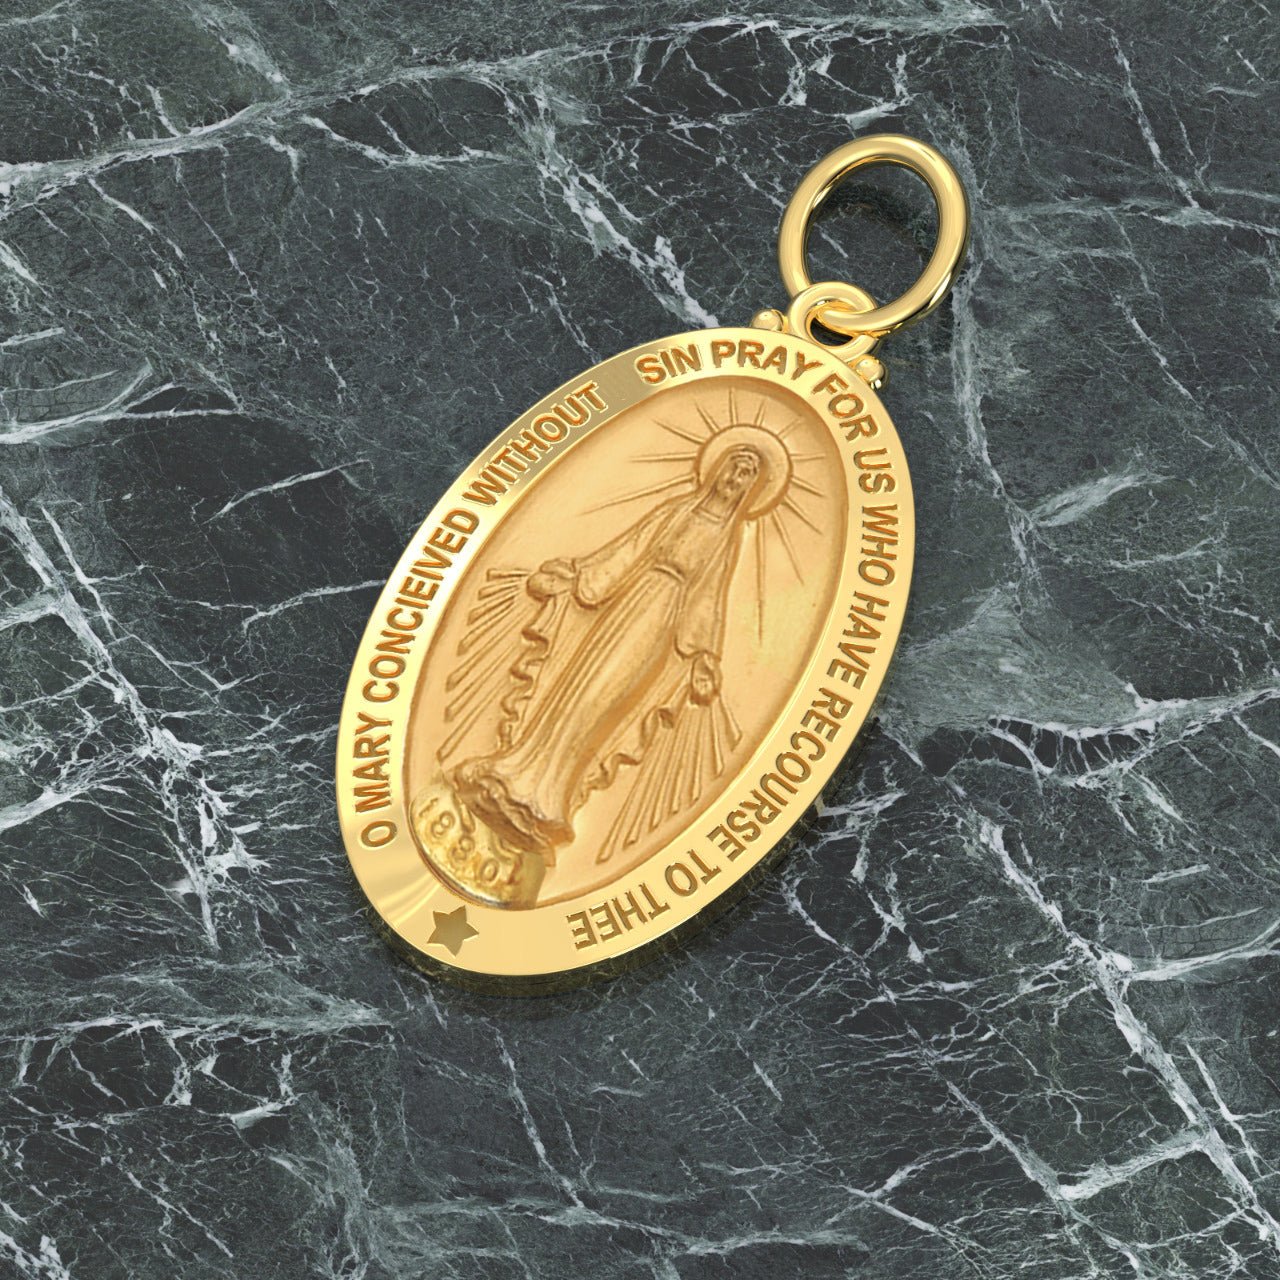 Ladies 14K Yellow Gold Miraculous Virgin Mary Solid Oval Polished Pendant Necklace, 28mm - US Jewels